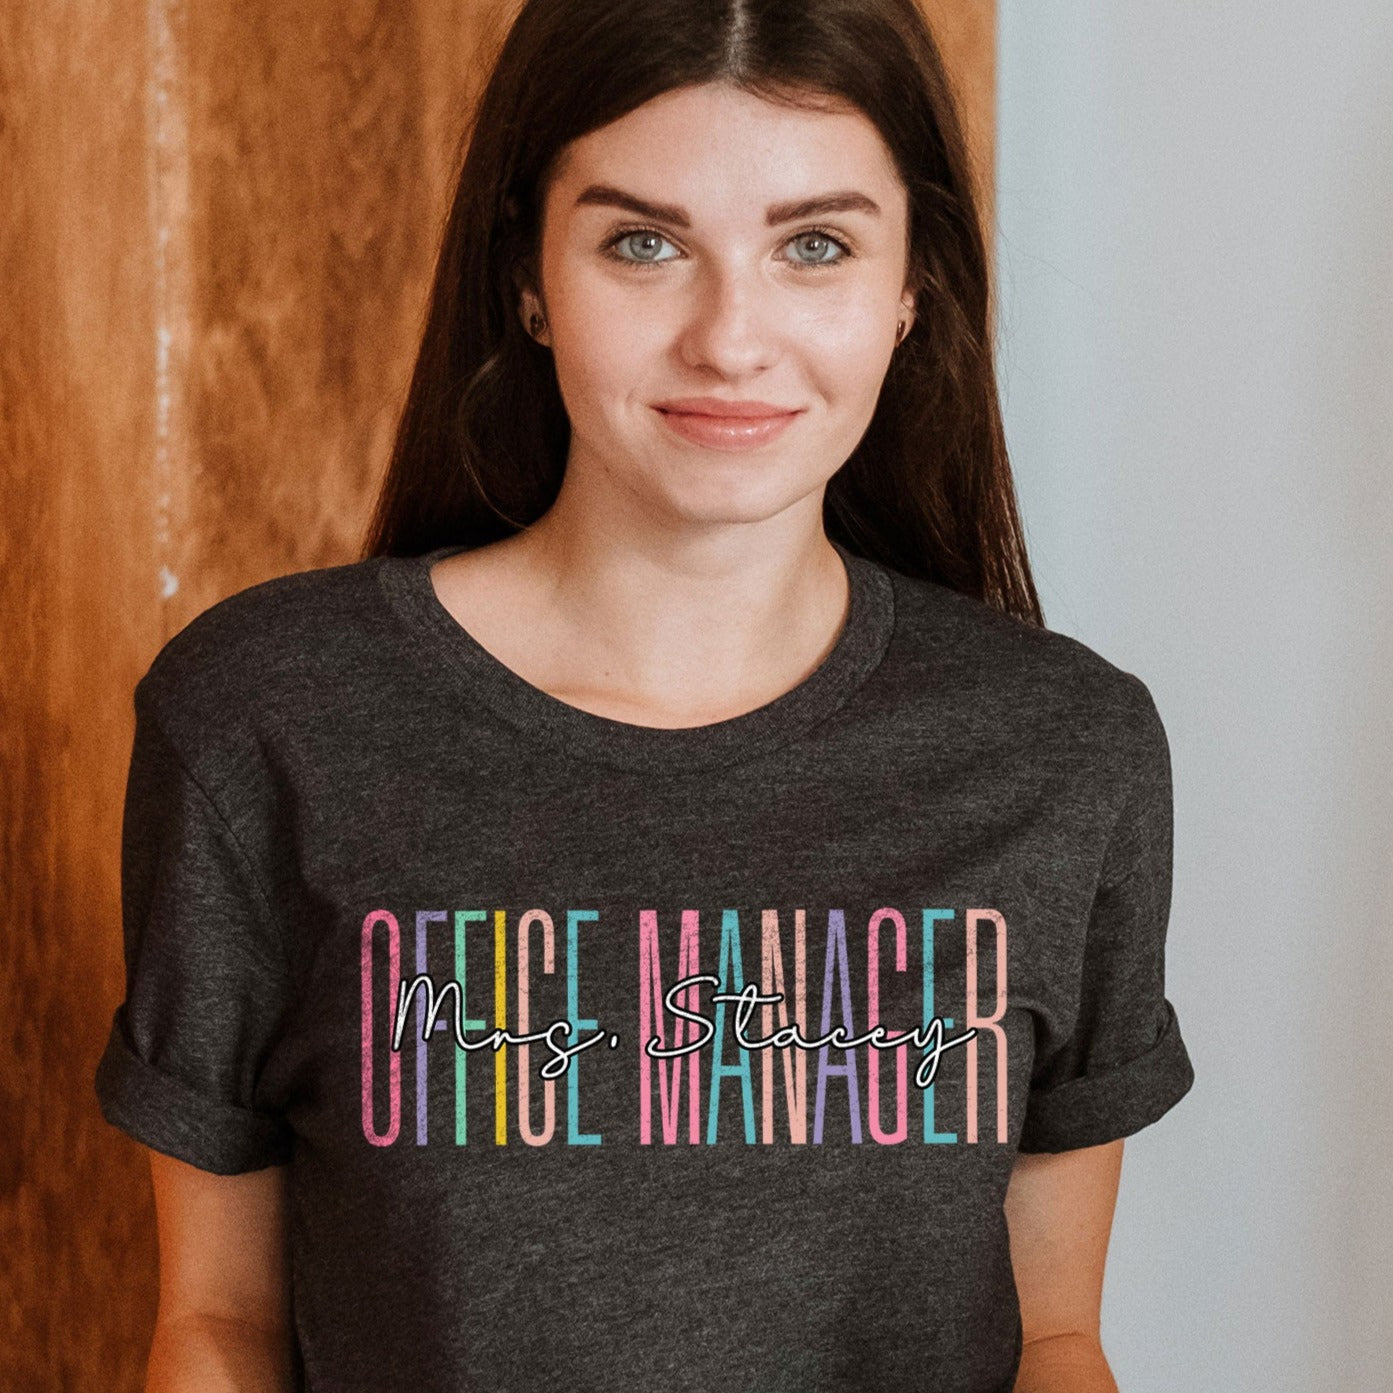 Custom Names Office Manager Shirt Personalize Name Managing Registrar Office Gift Healthcare HR Human Resource Lead Main HQ Work Sweater Tee